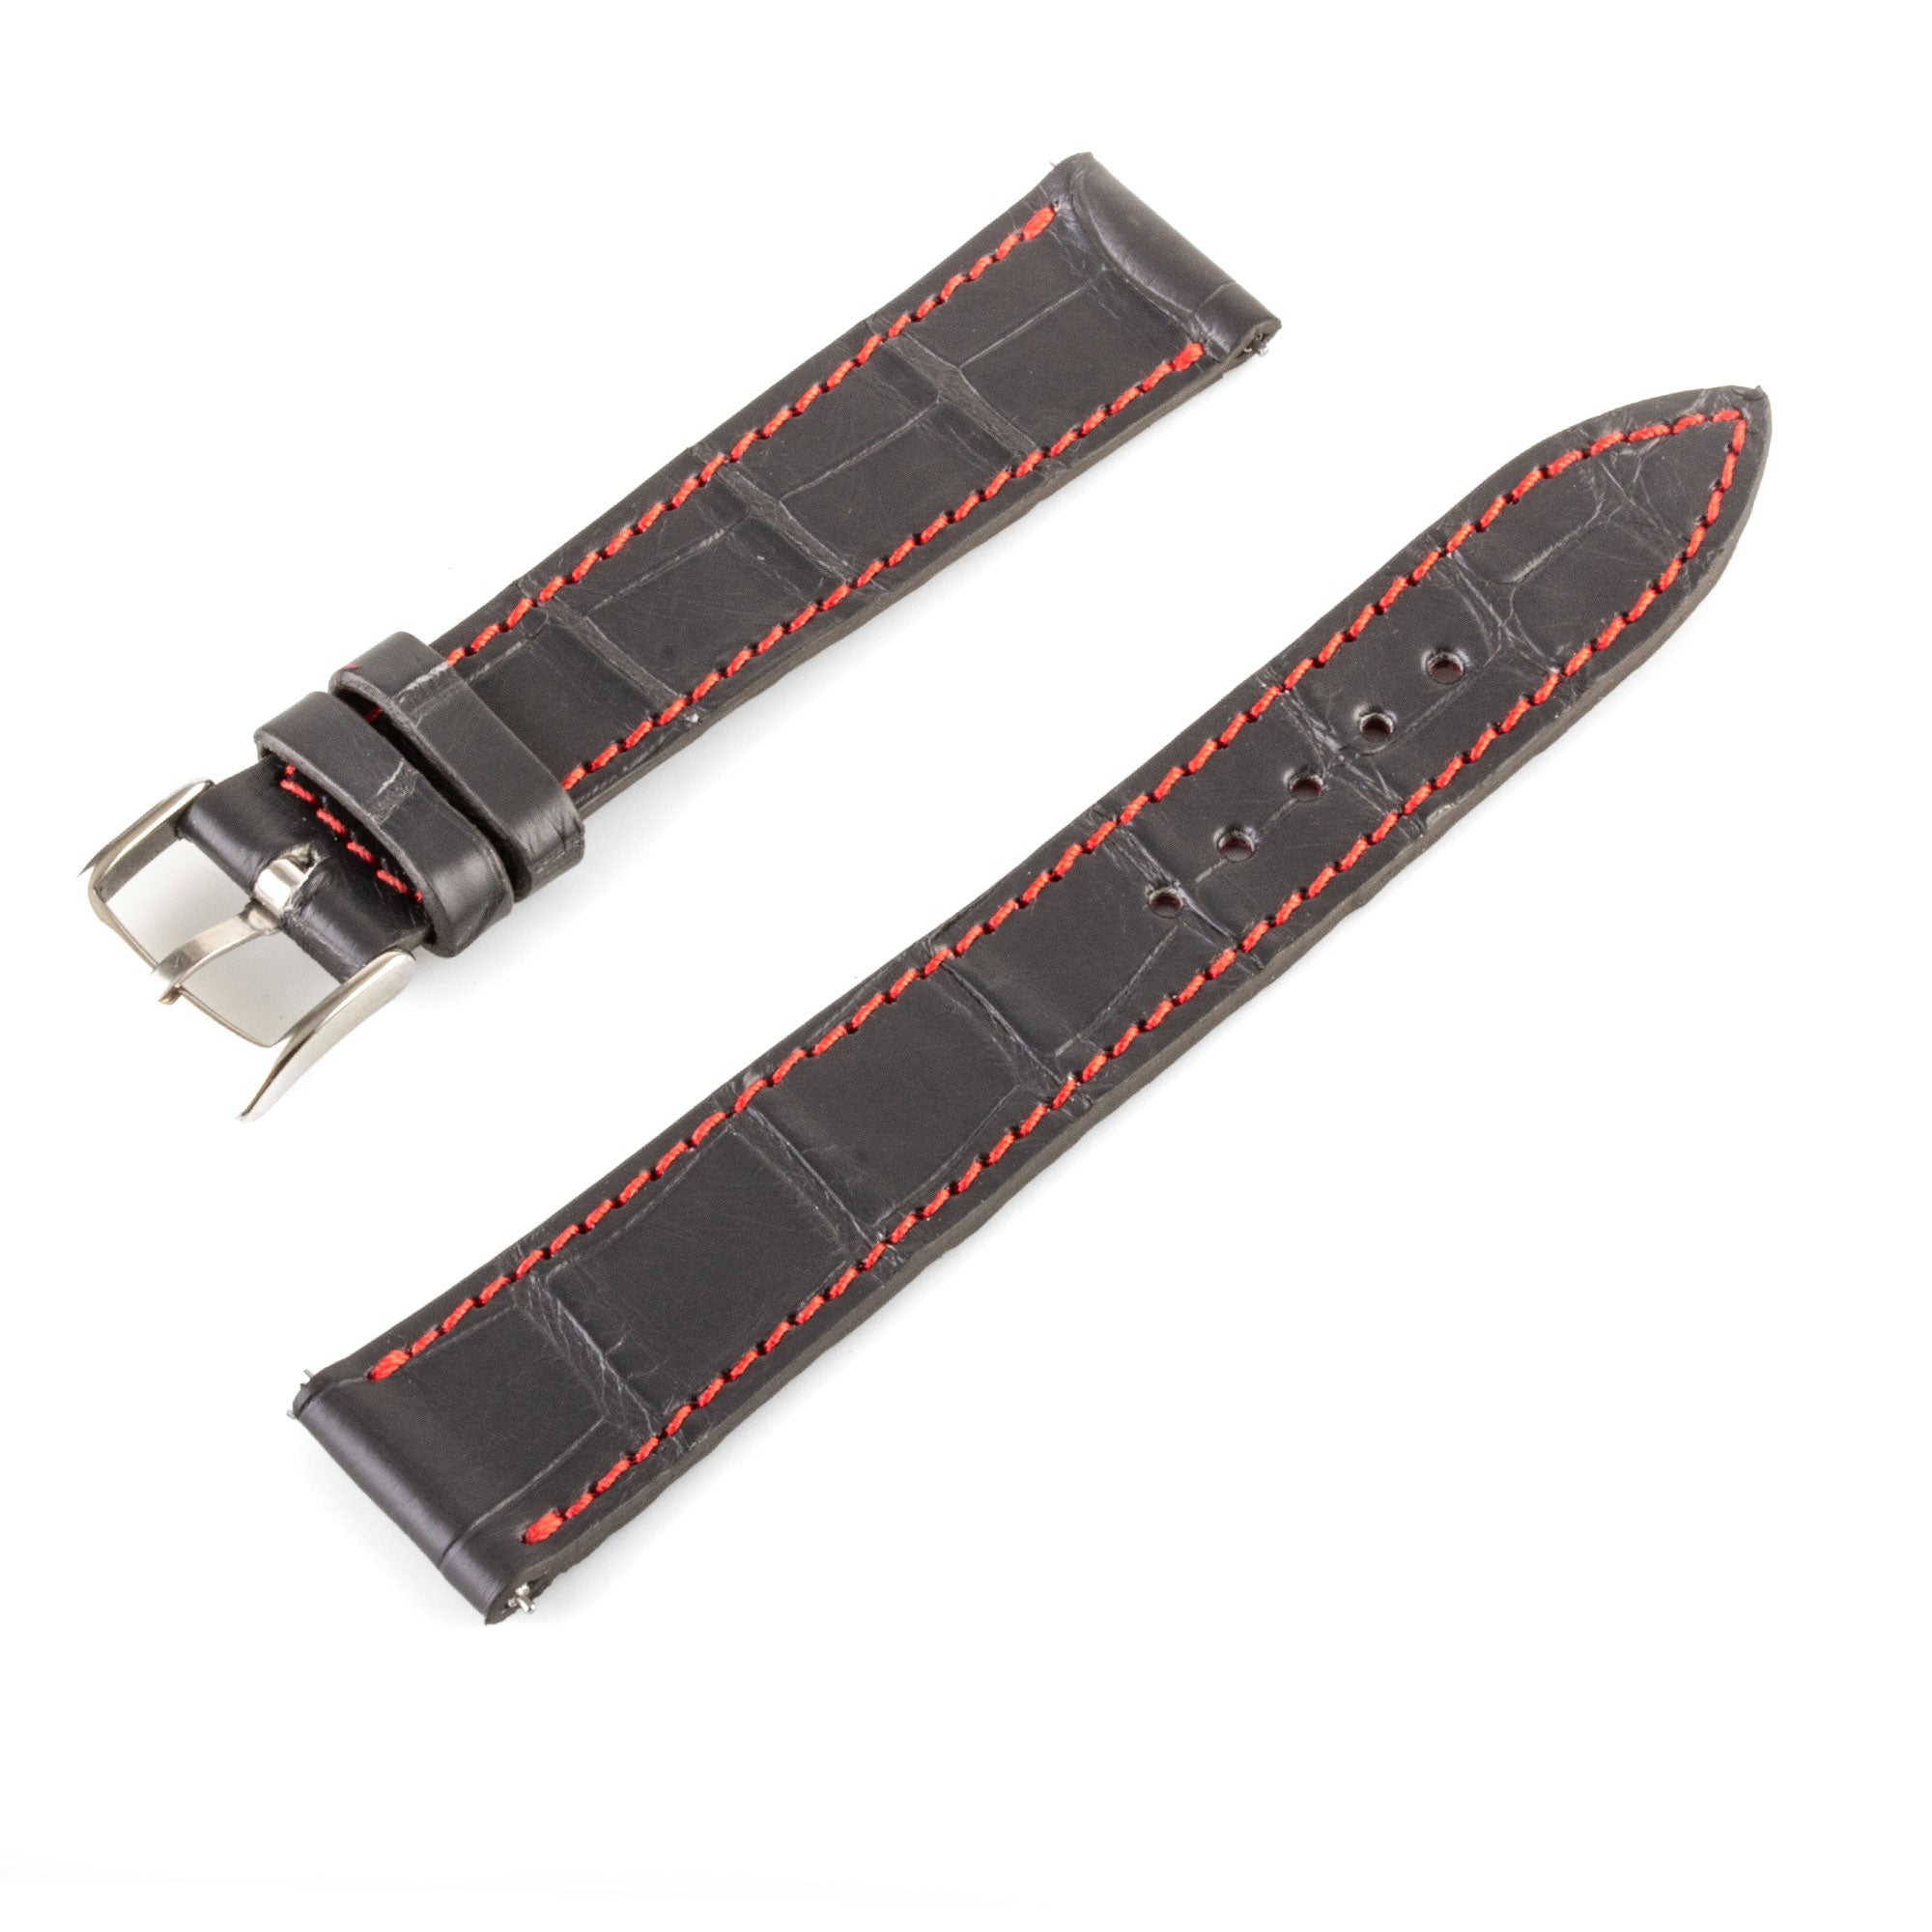 Alligator leather "Solo" watch band - 18mm width (0.71 inches) / Size M (n° 10)